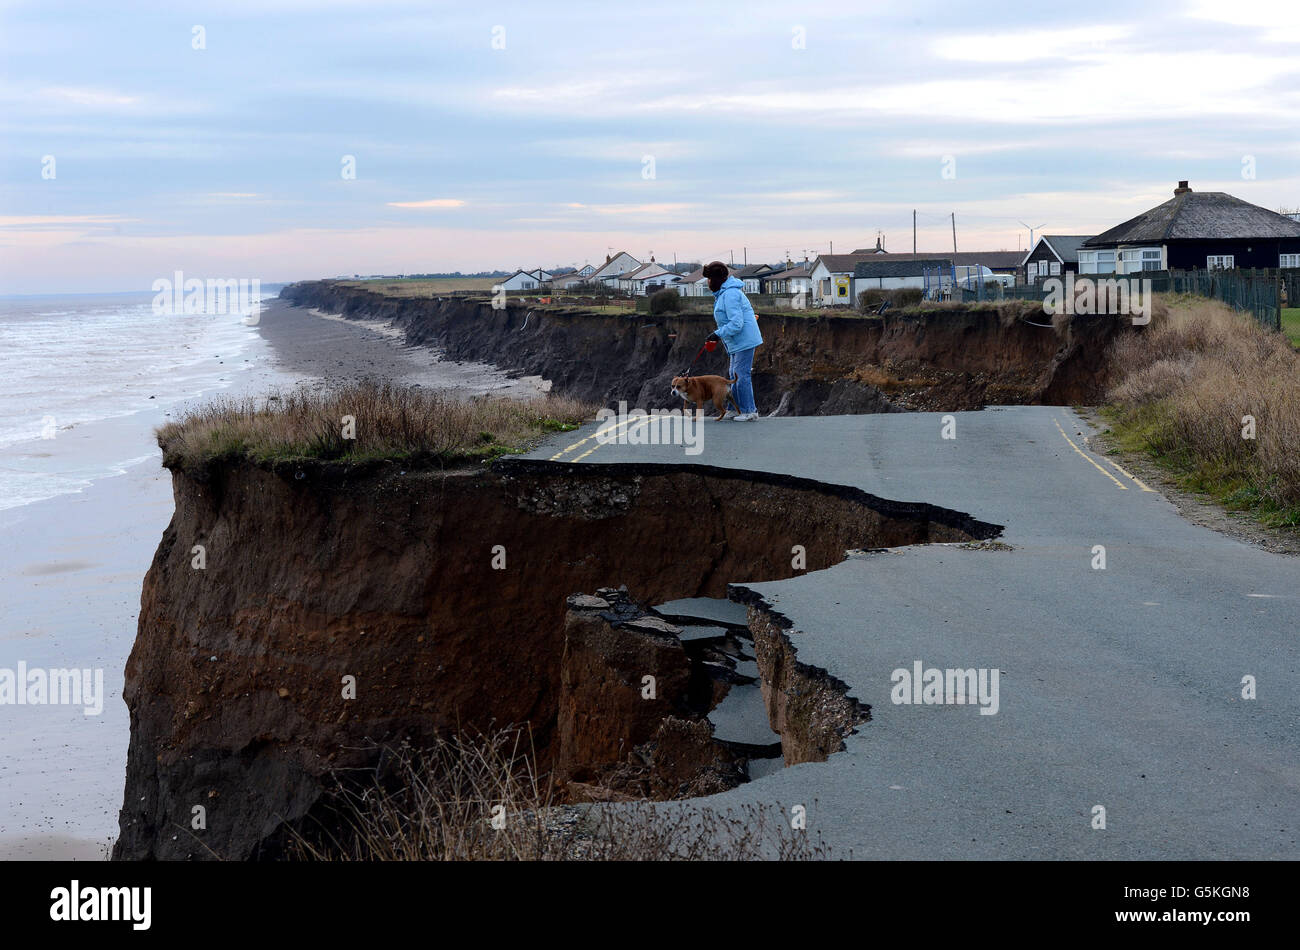 The coastal road between Skipsea and Ulrome collapses into the North Sea. Stock Photo